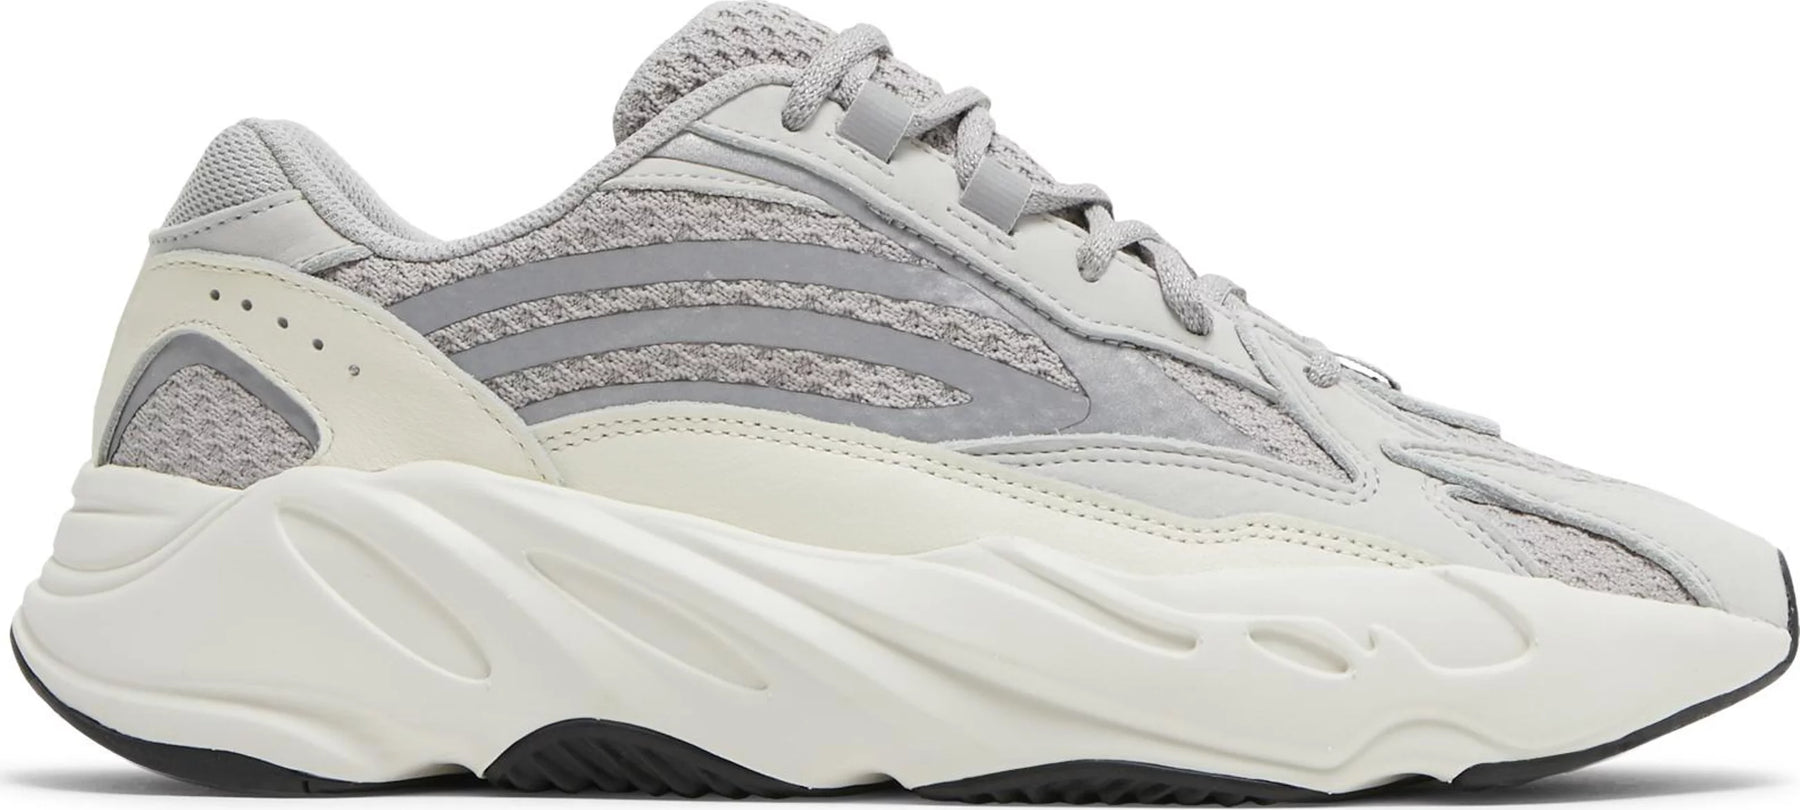 Adidas Yeezy Boost 700 V2 'Static' (Preowned)